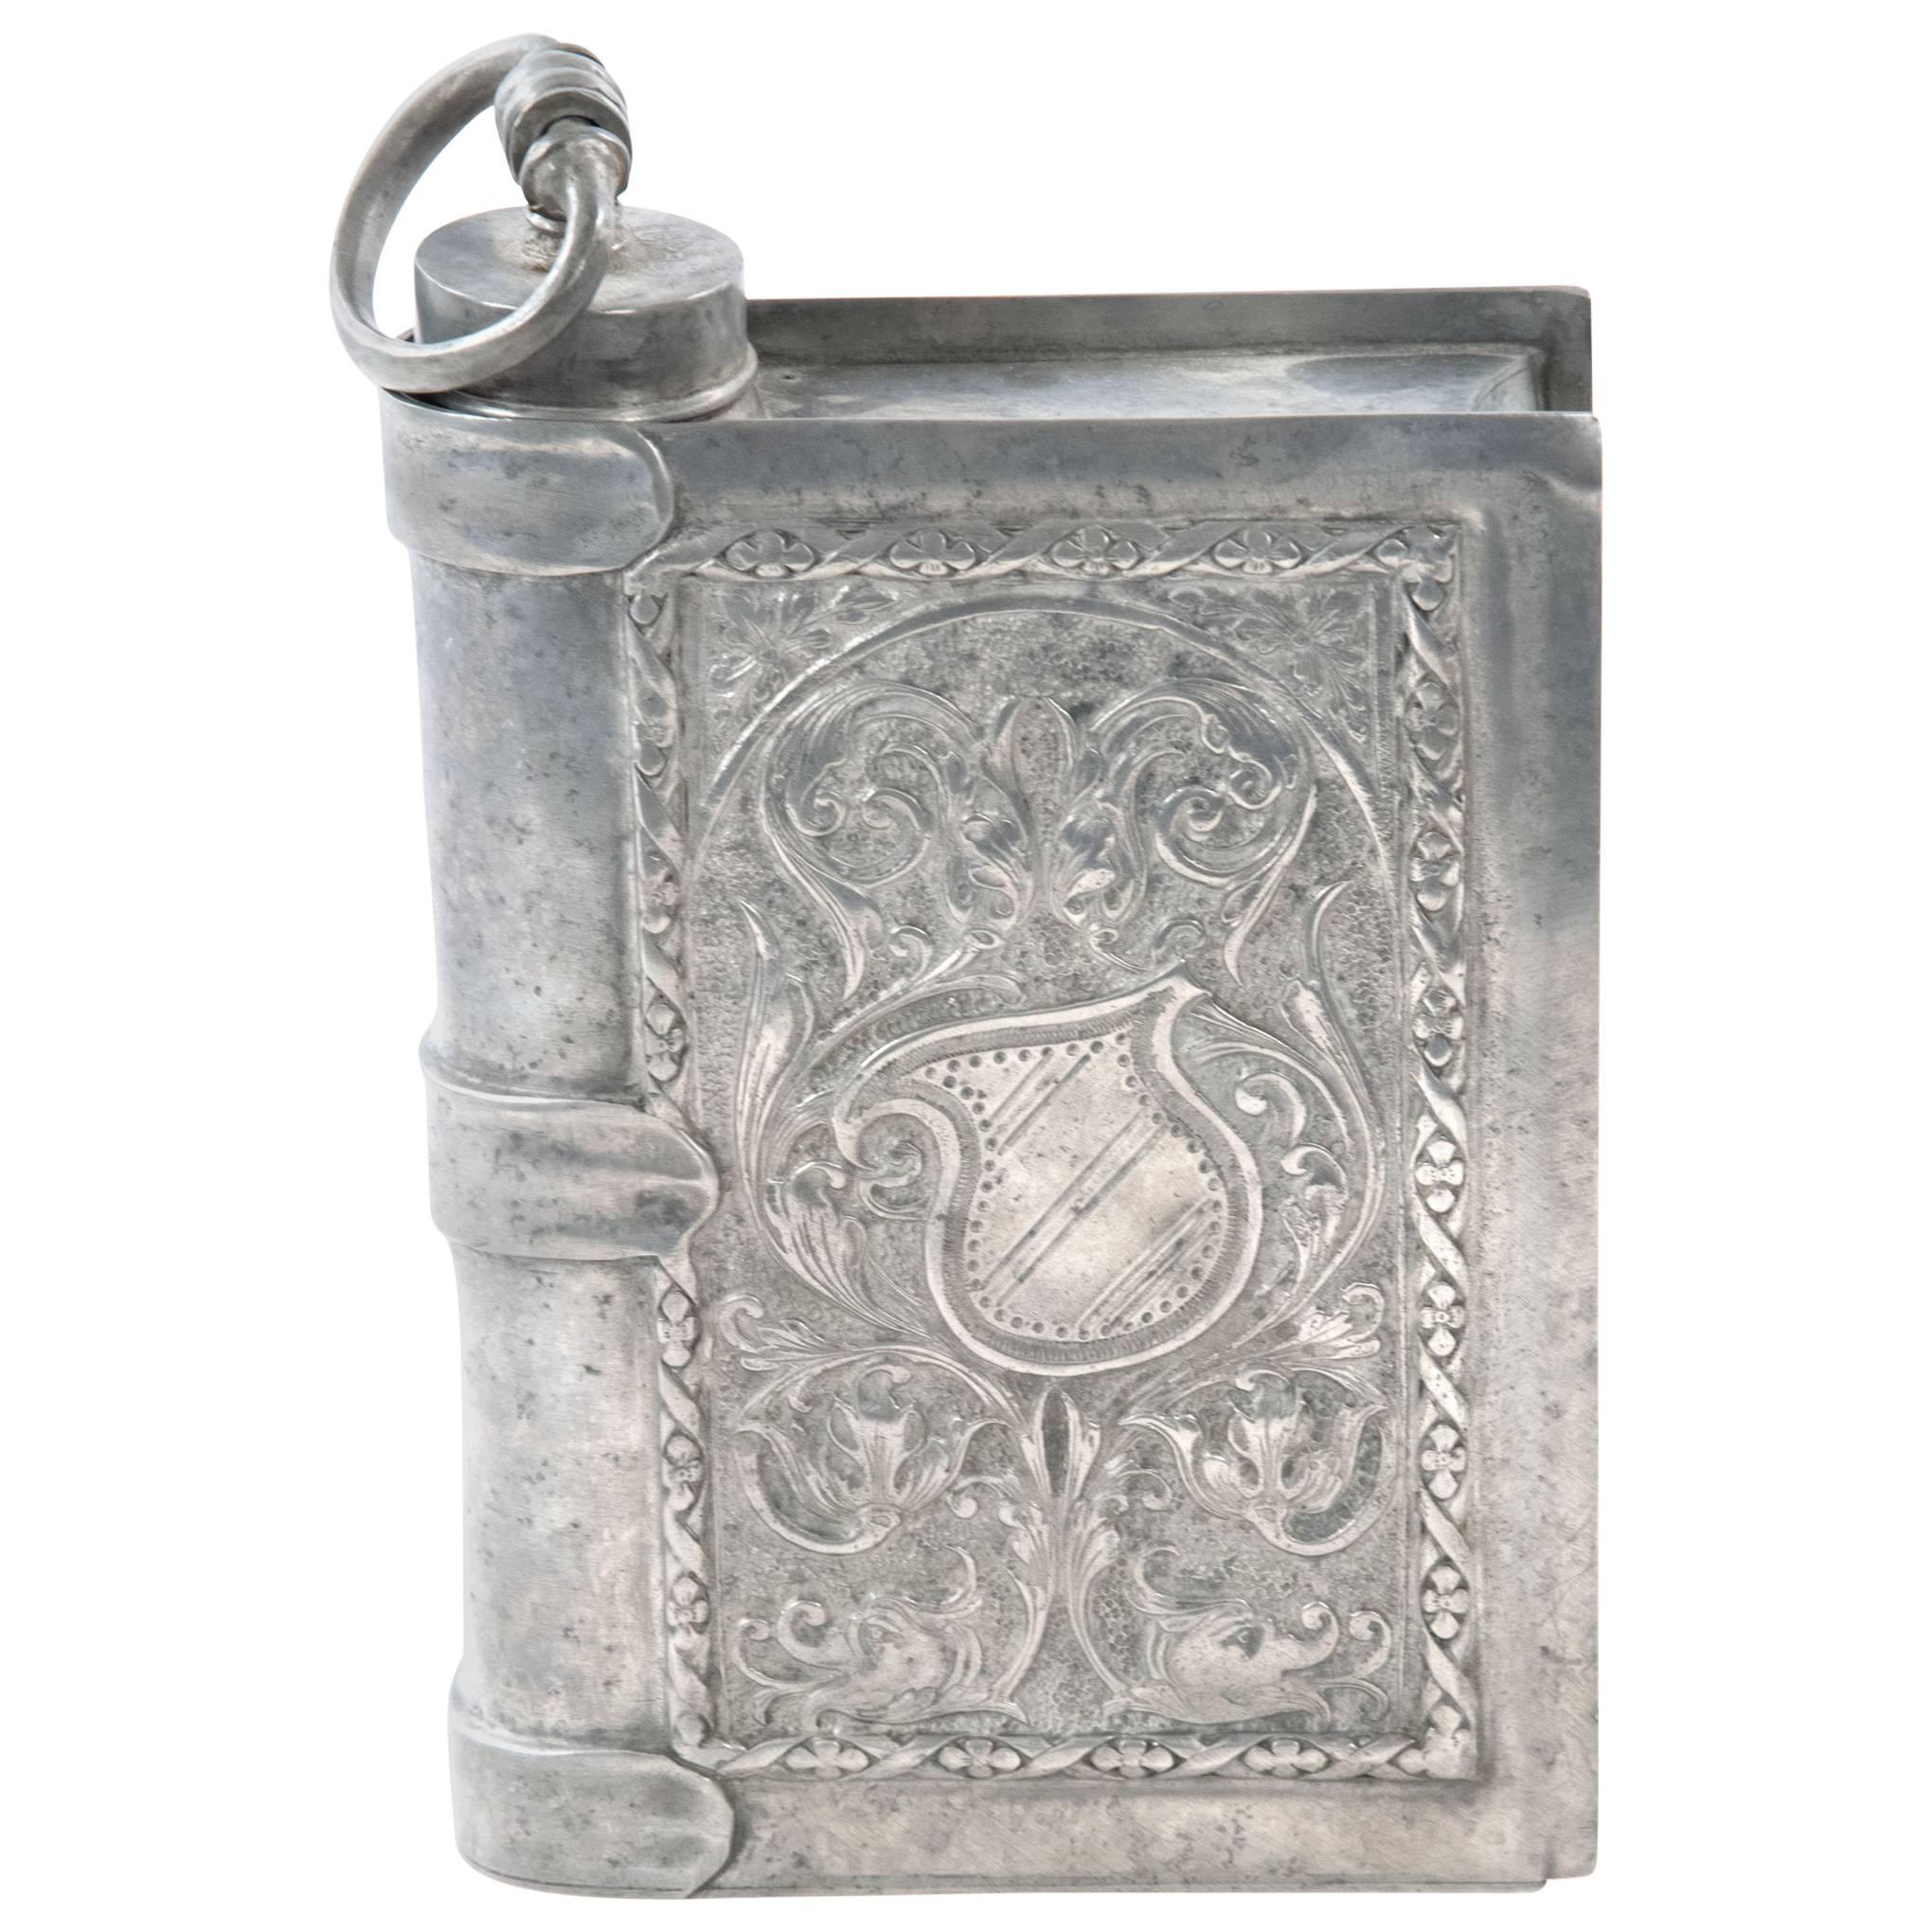 Faux-Book Pewter Flask with Renaissance-Style Engravings